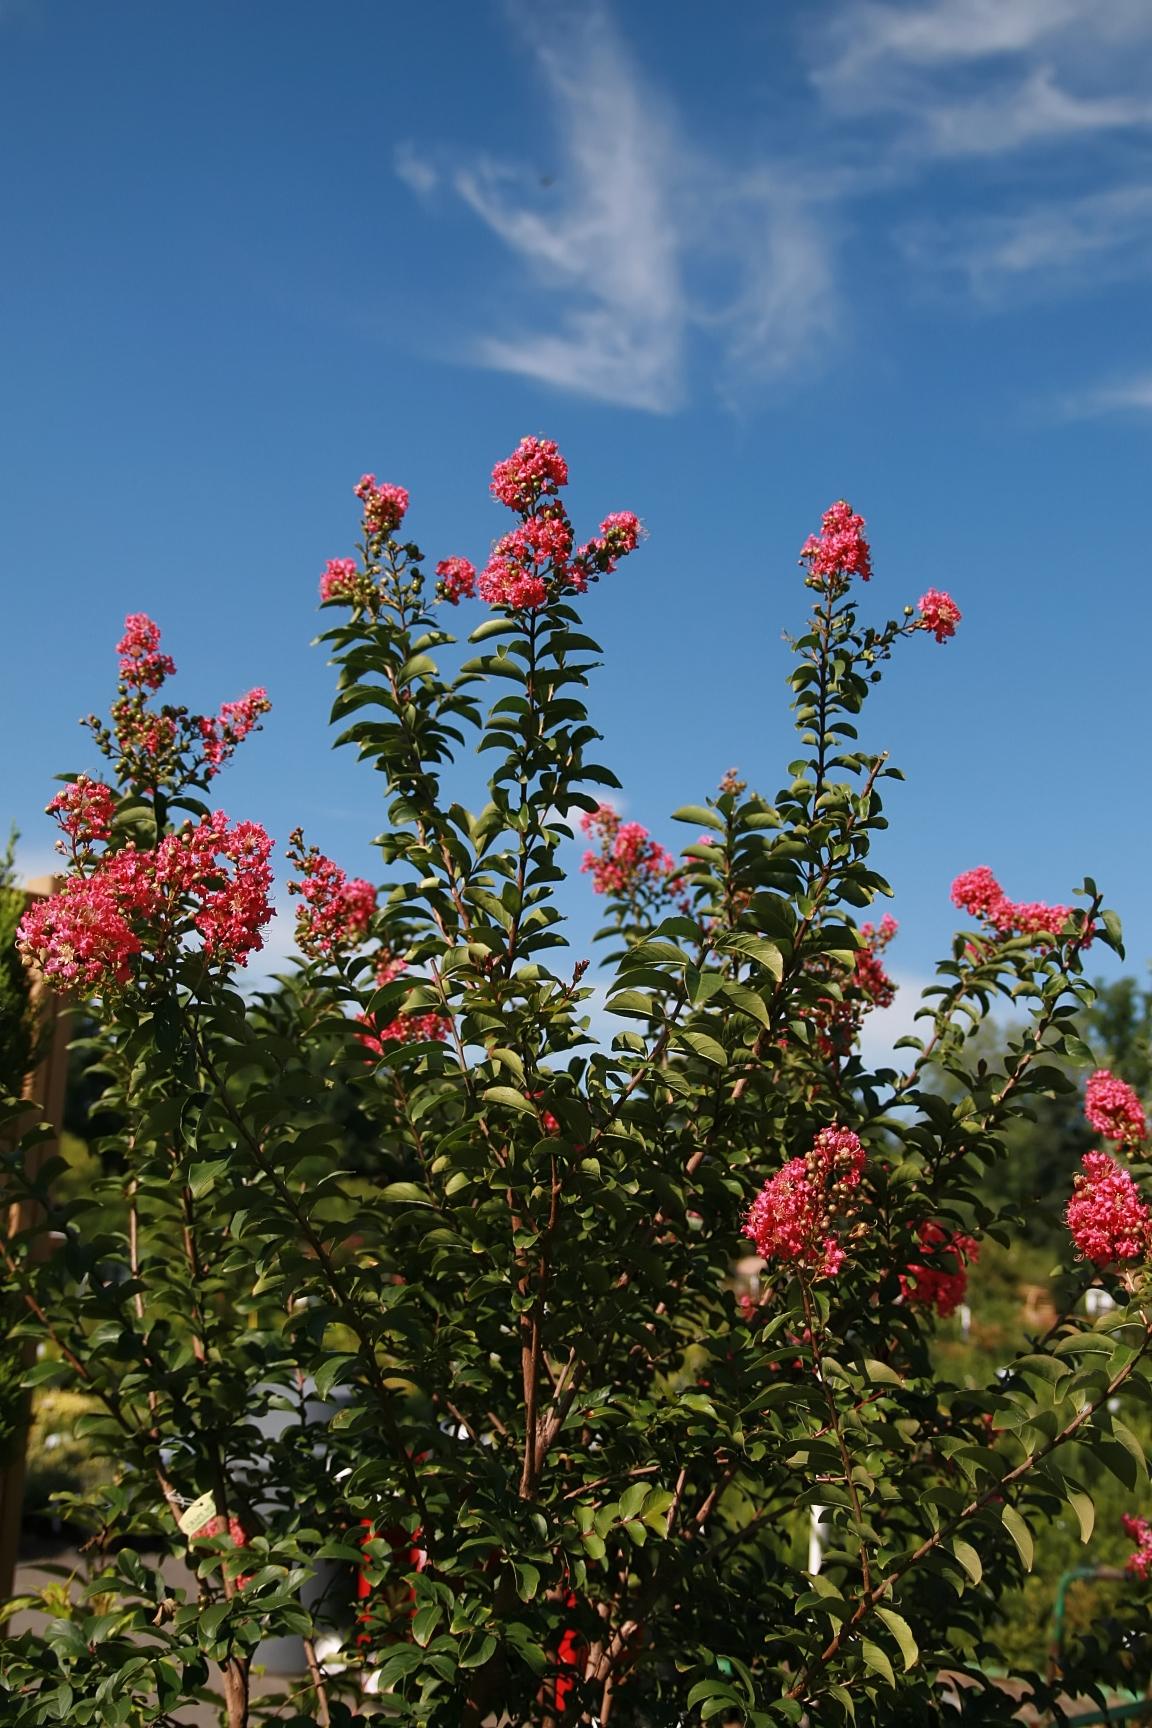 Pink flowers with beige buds, green leaves and brown stems